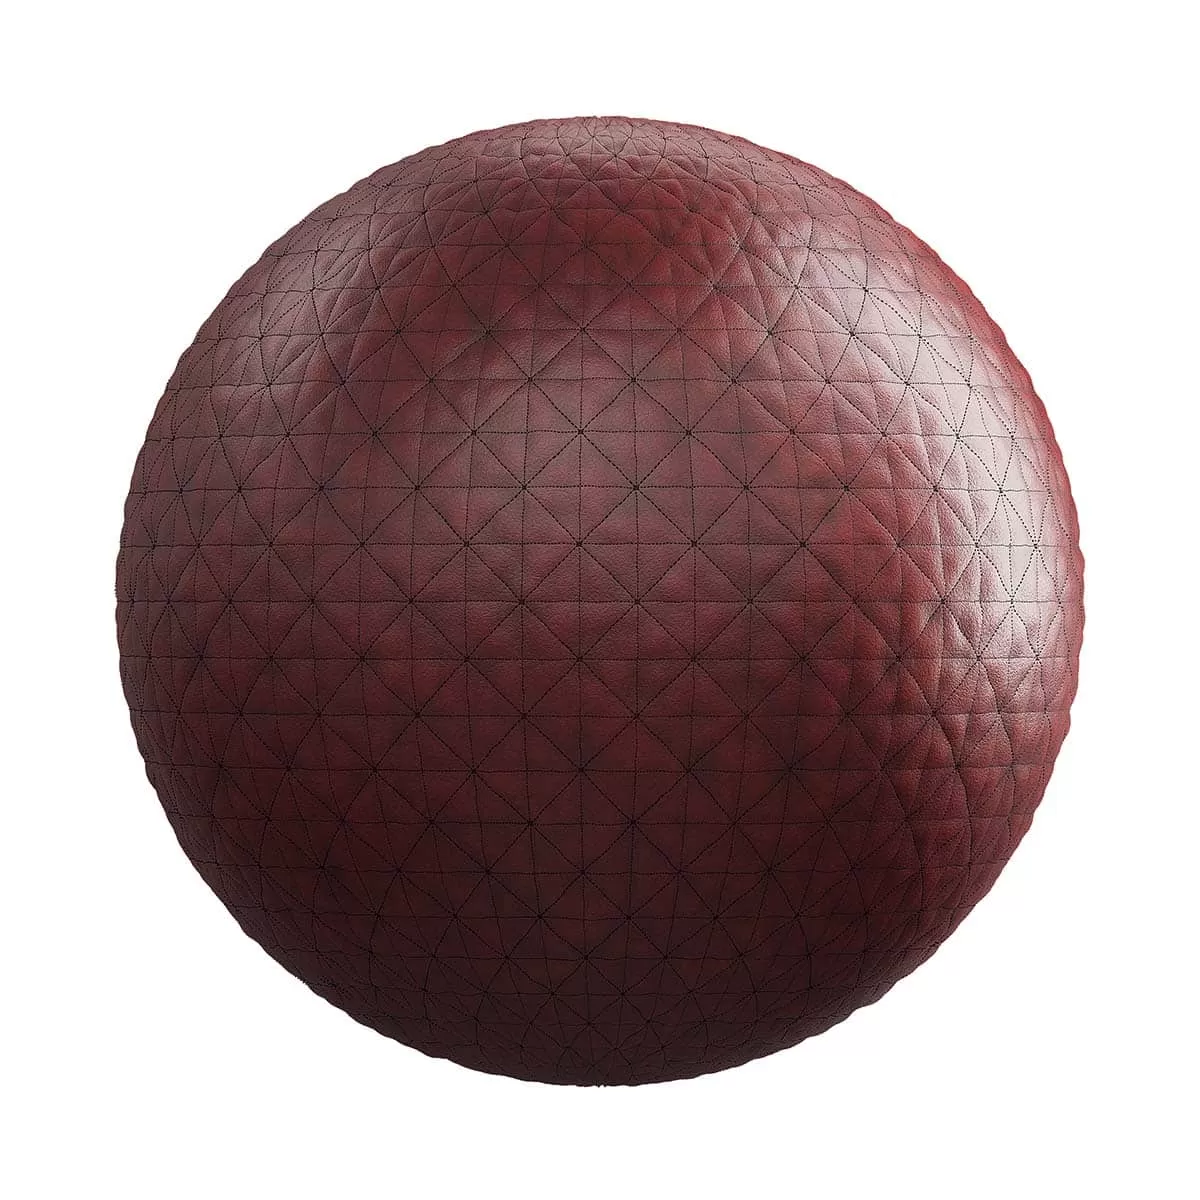 PBR Textures Volume 27 – Fabrics – 4K – 8K – quilted_red_leather_26_86